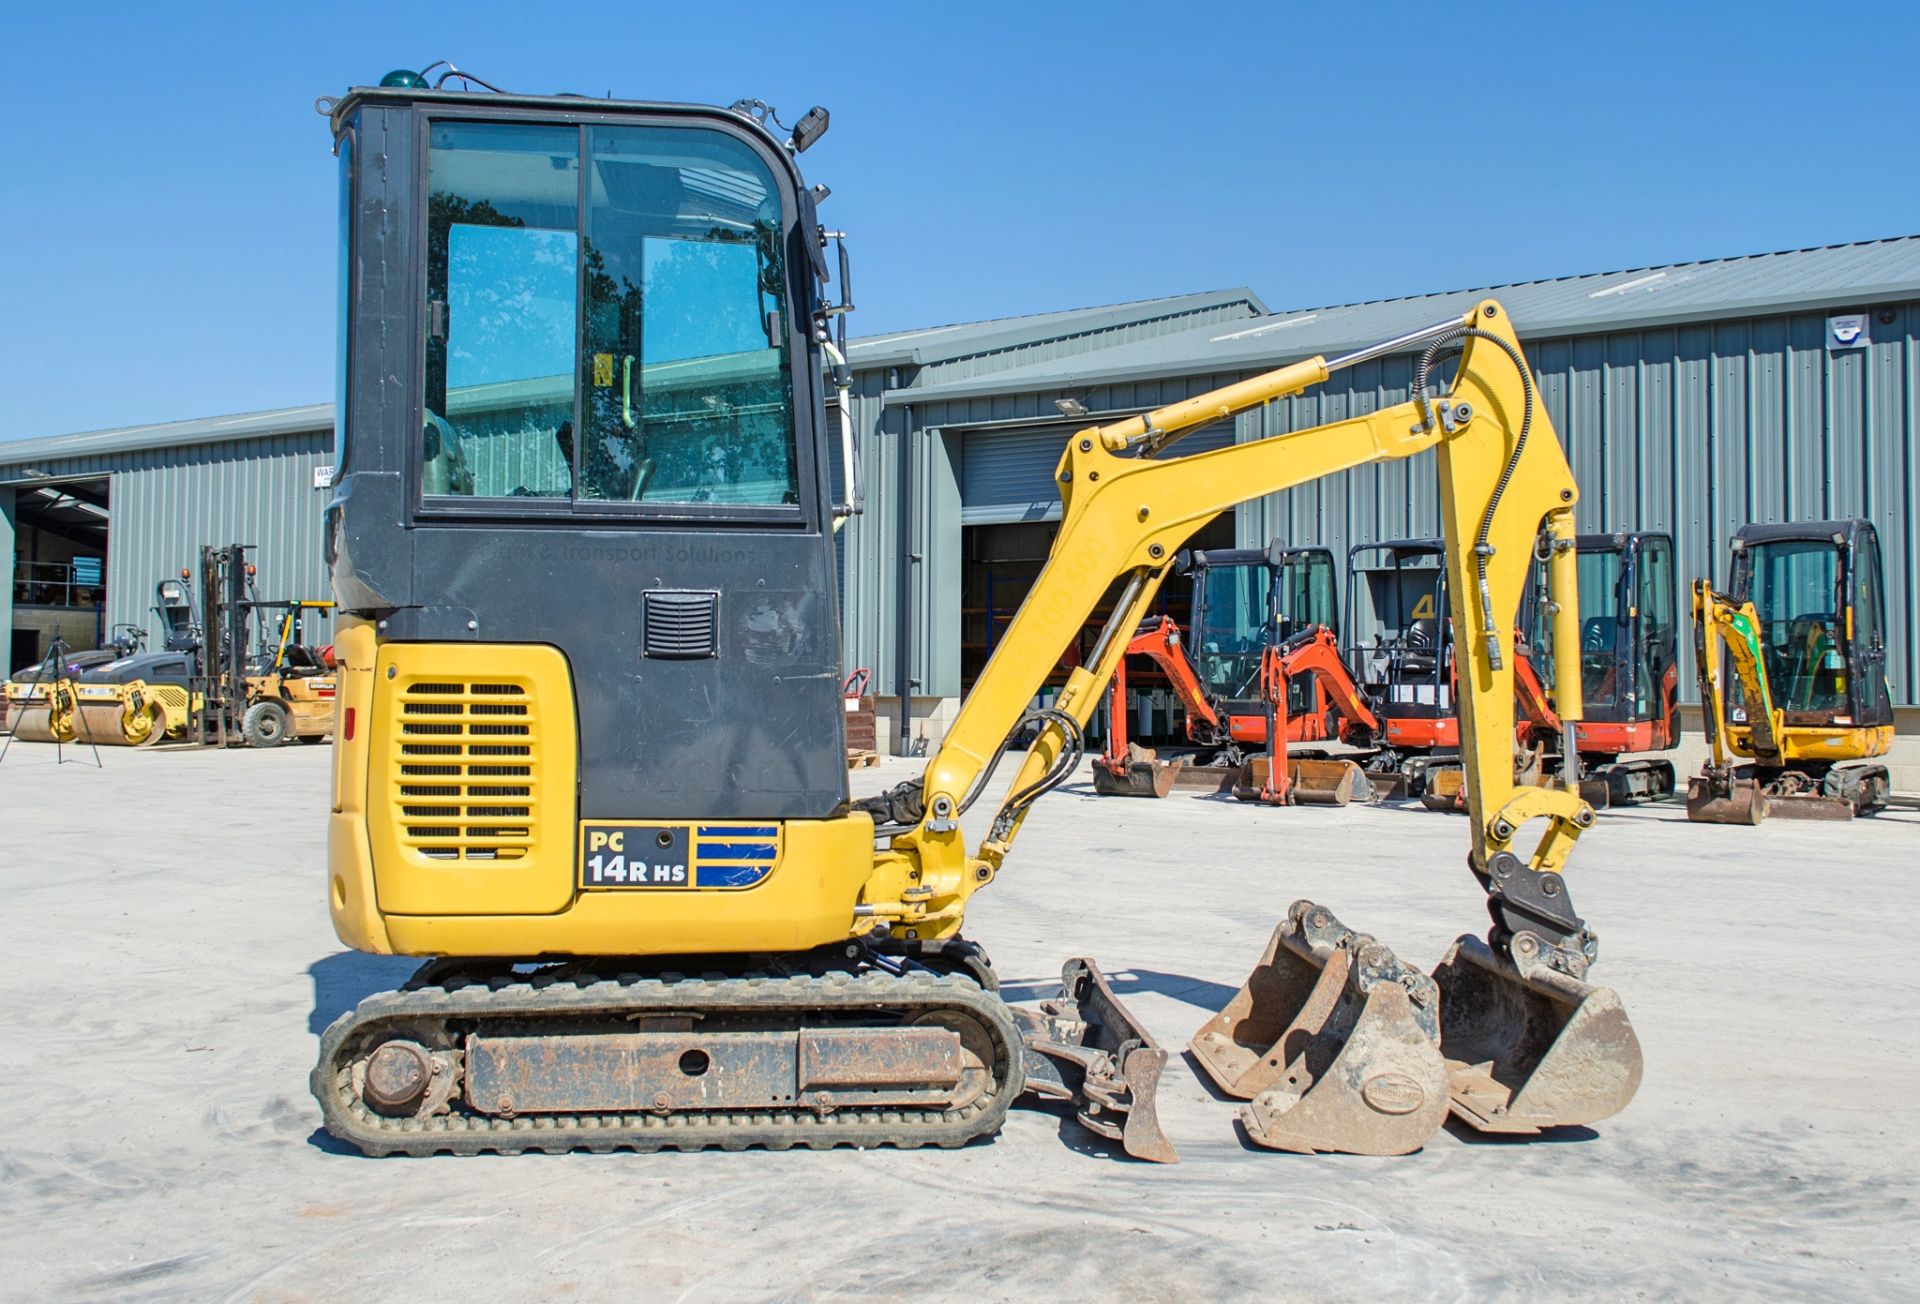 Komatsu PC14R-3HS 1.5 tonne rubber tracked mini excavator Year: 2019 S/N: F50698 Recorded Hours: - Image 7 of 20